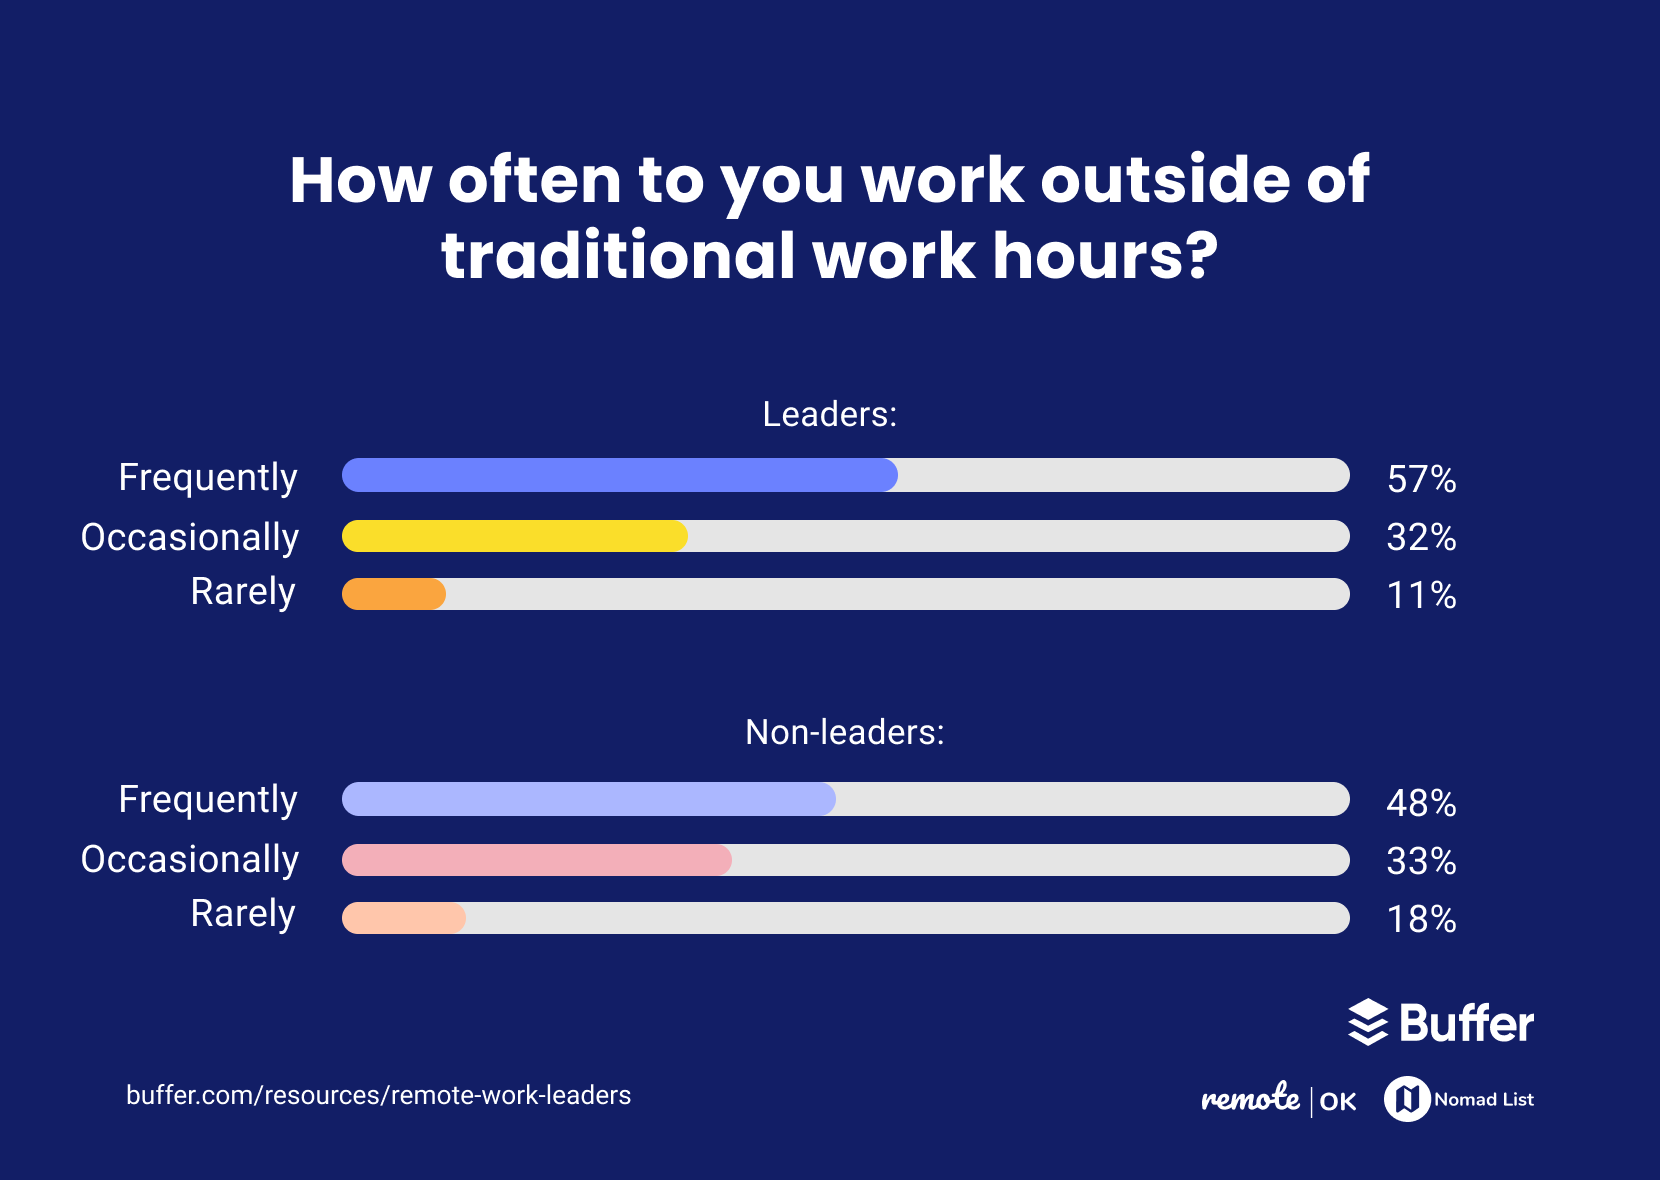 WorkOutsideOfTraditionalHours - How Are Leaders Experiencing Remote Work?